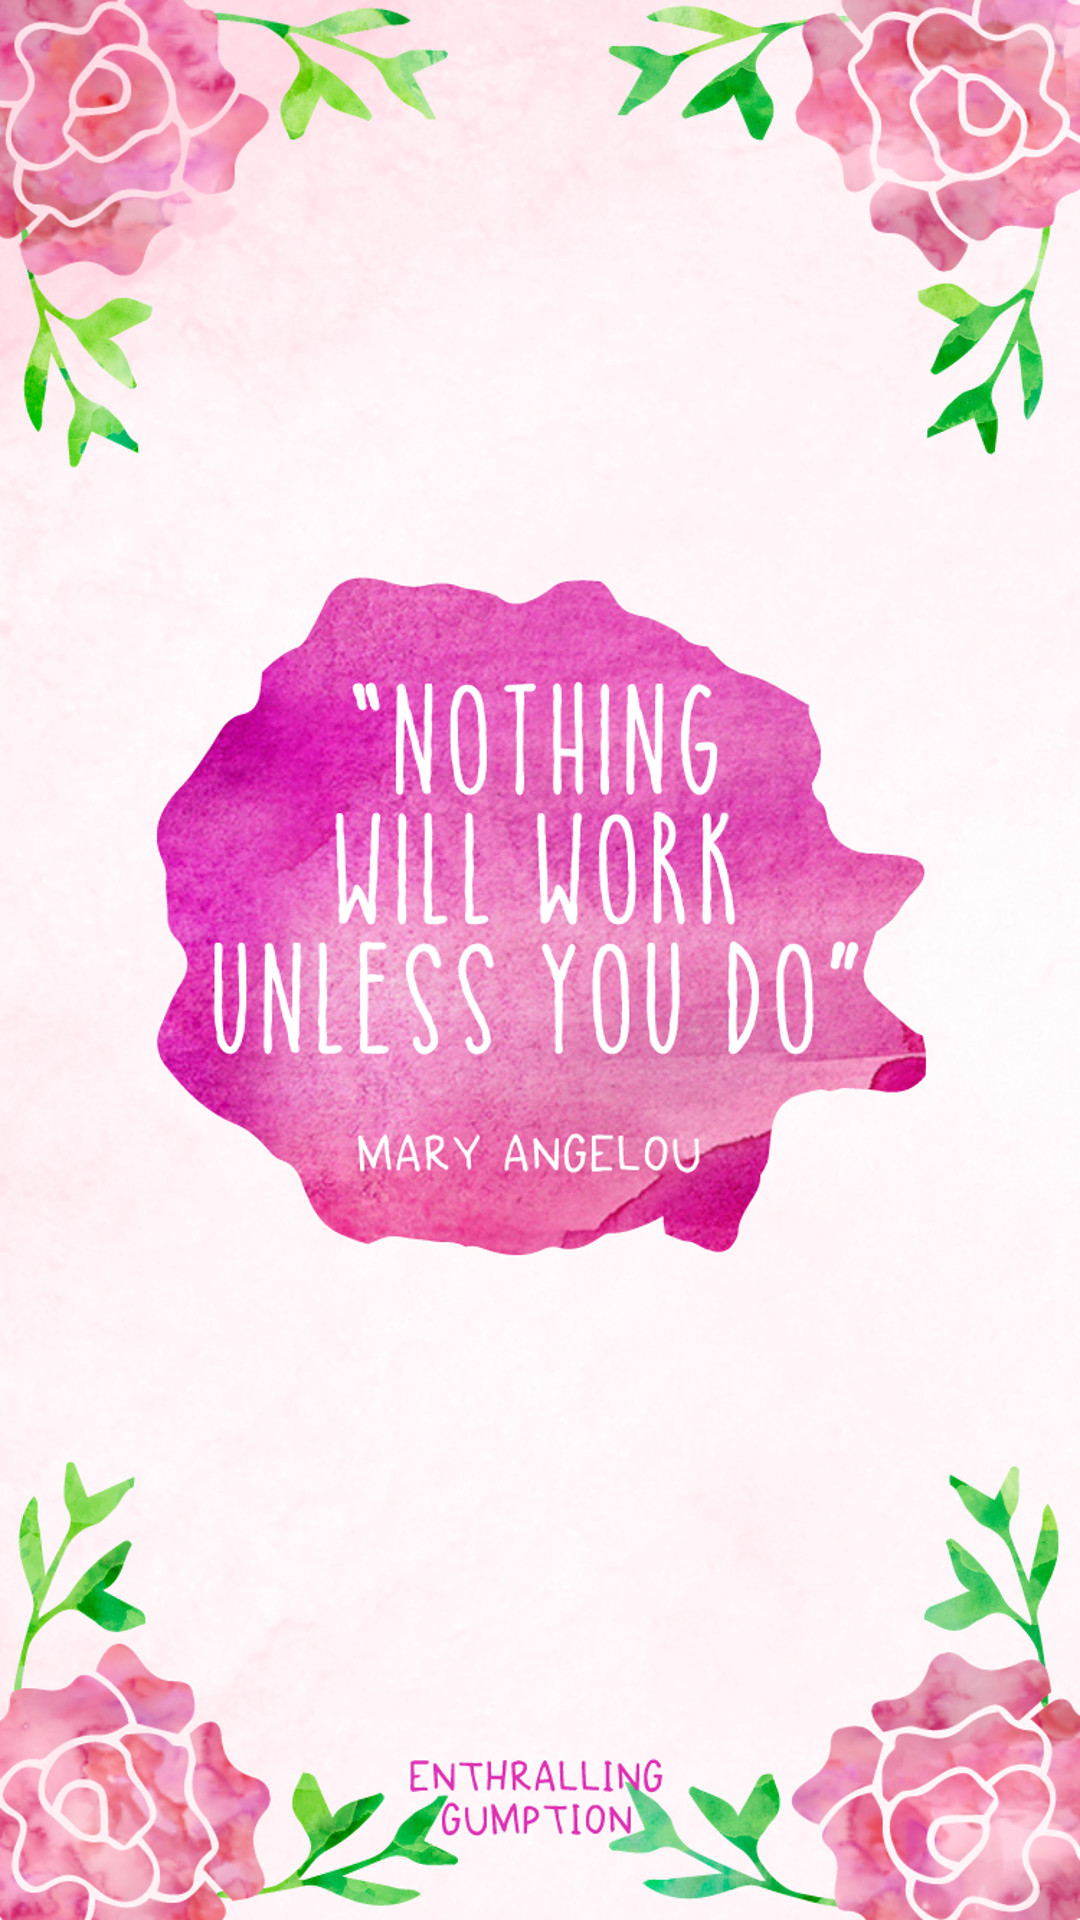 Nothing will work unless you do – Maya Angelou quote